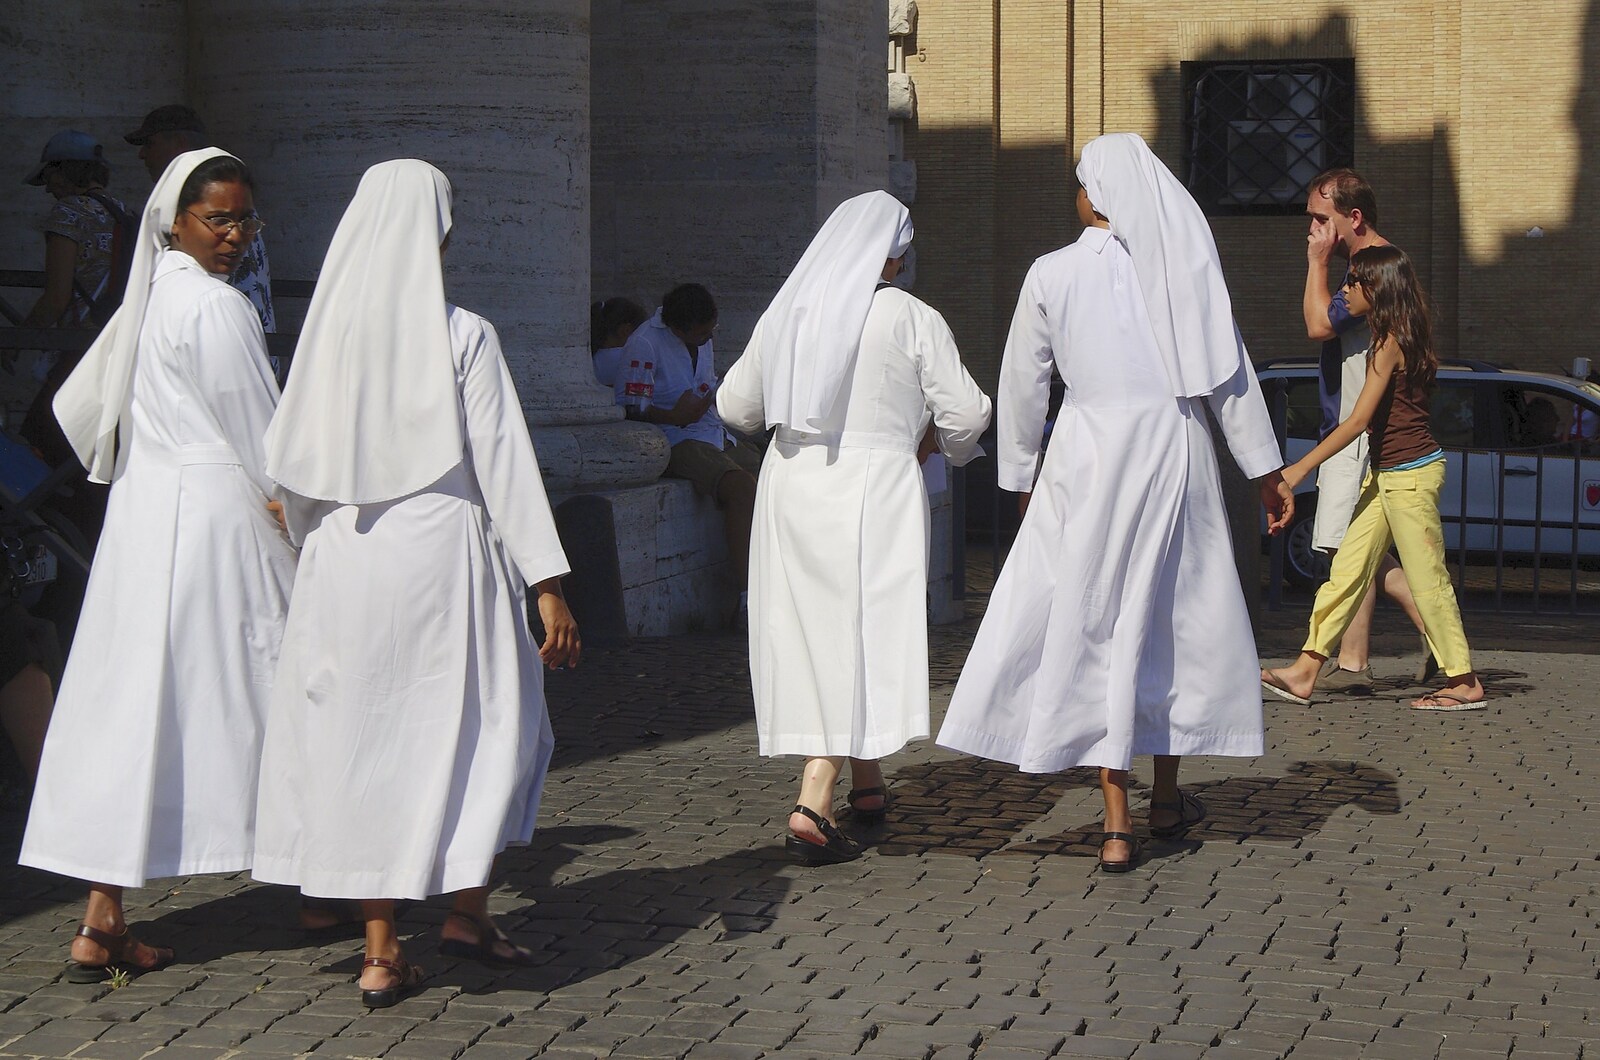 A group of nuns cross St. Peter's Square from A Sojourn in The Eternal City, Rome, Italy - 22nd July 2008